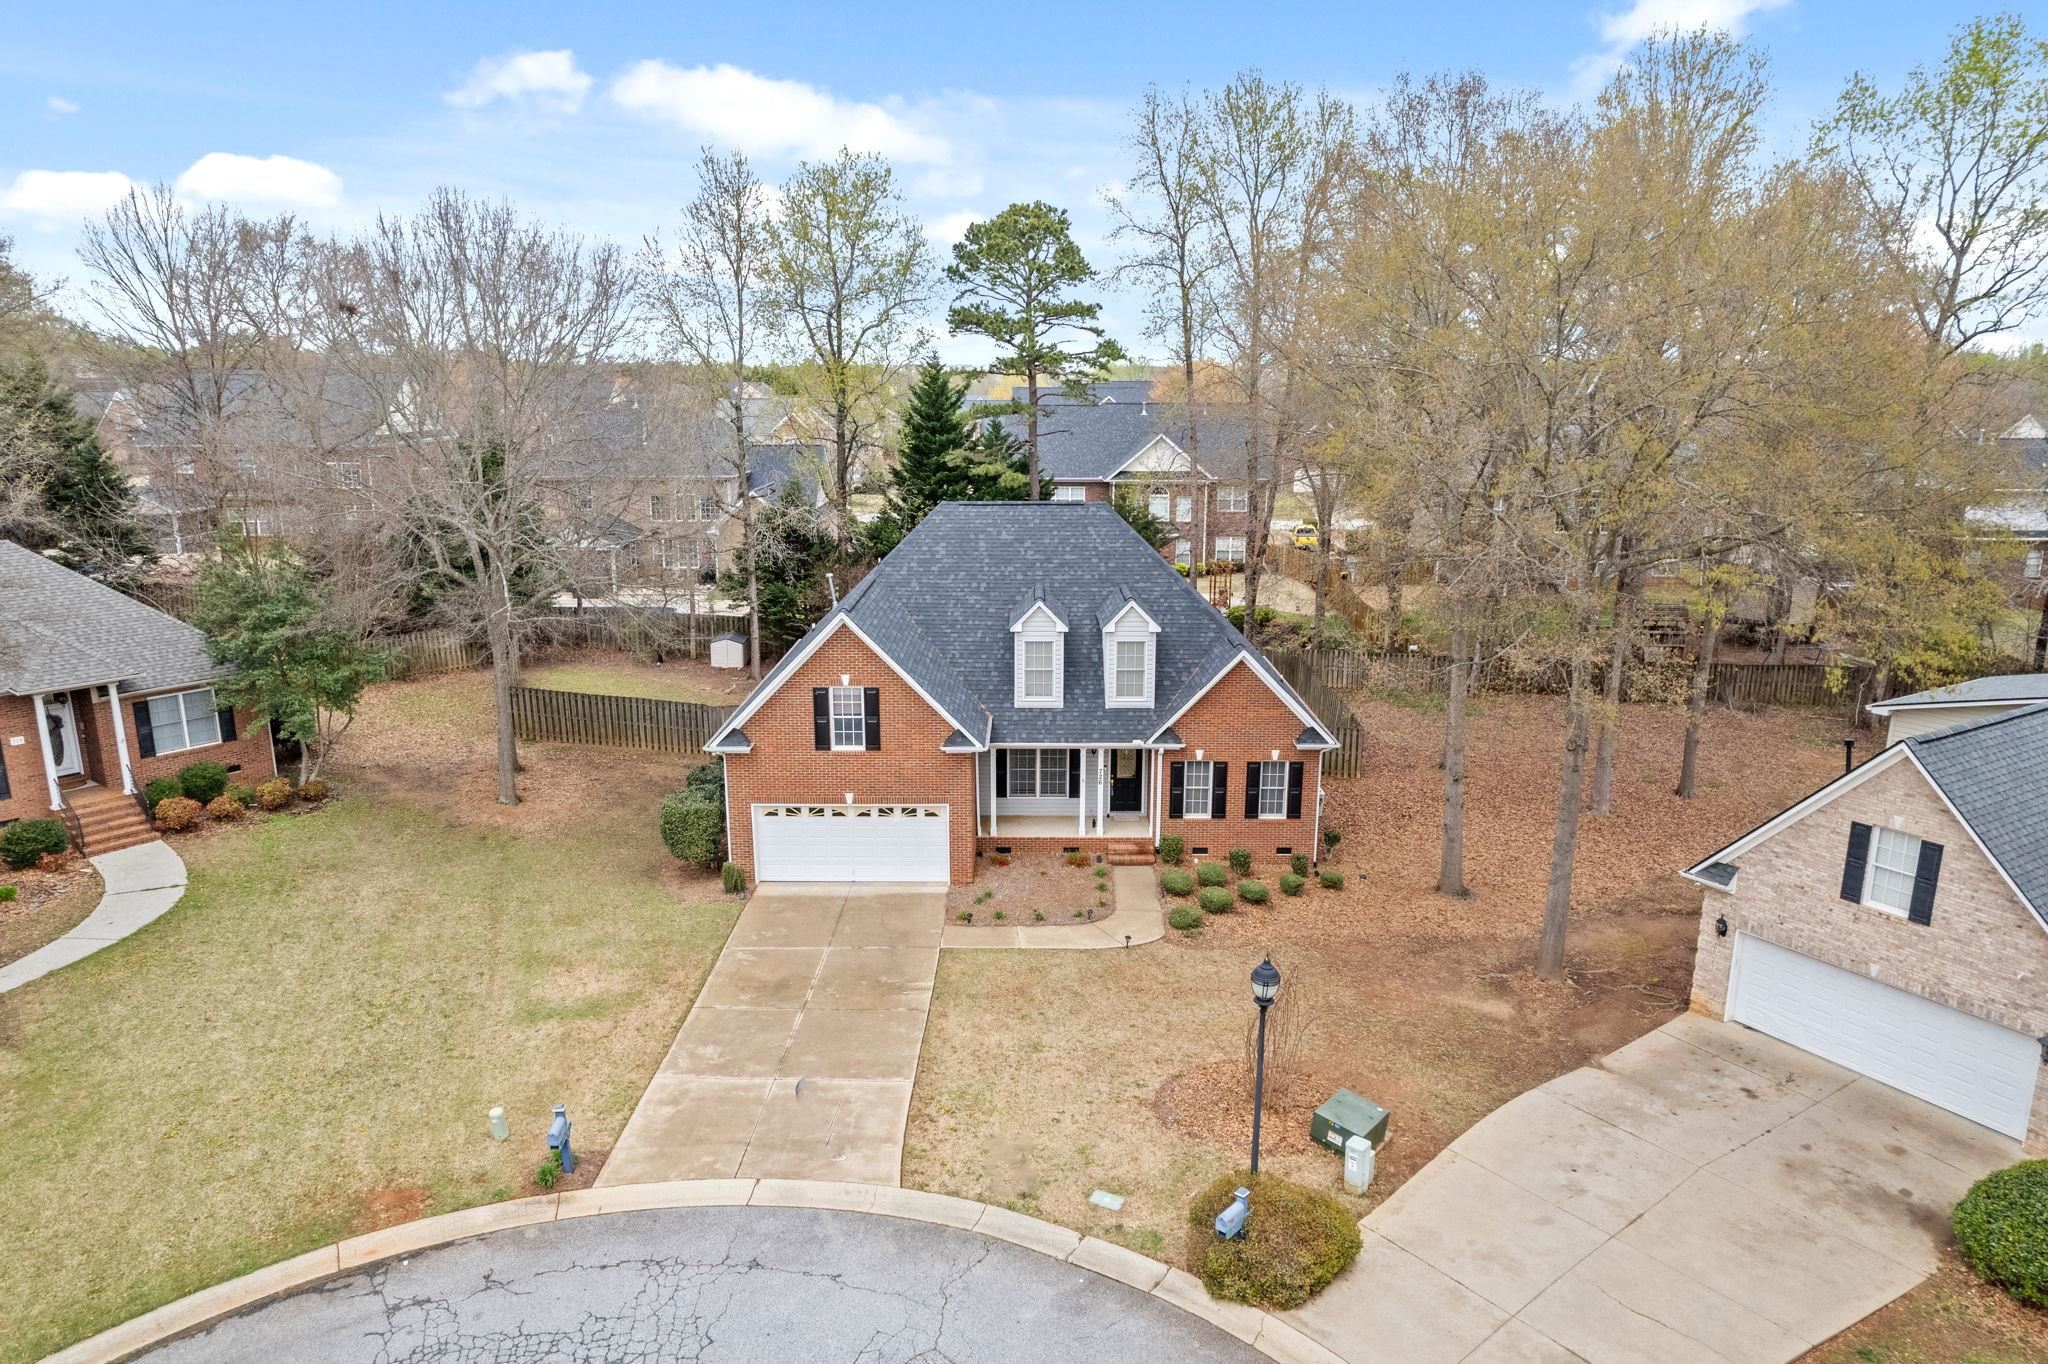 View Boiling Springs, SC 29316 house